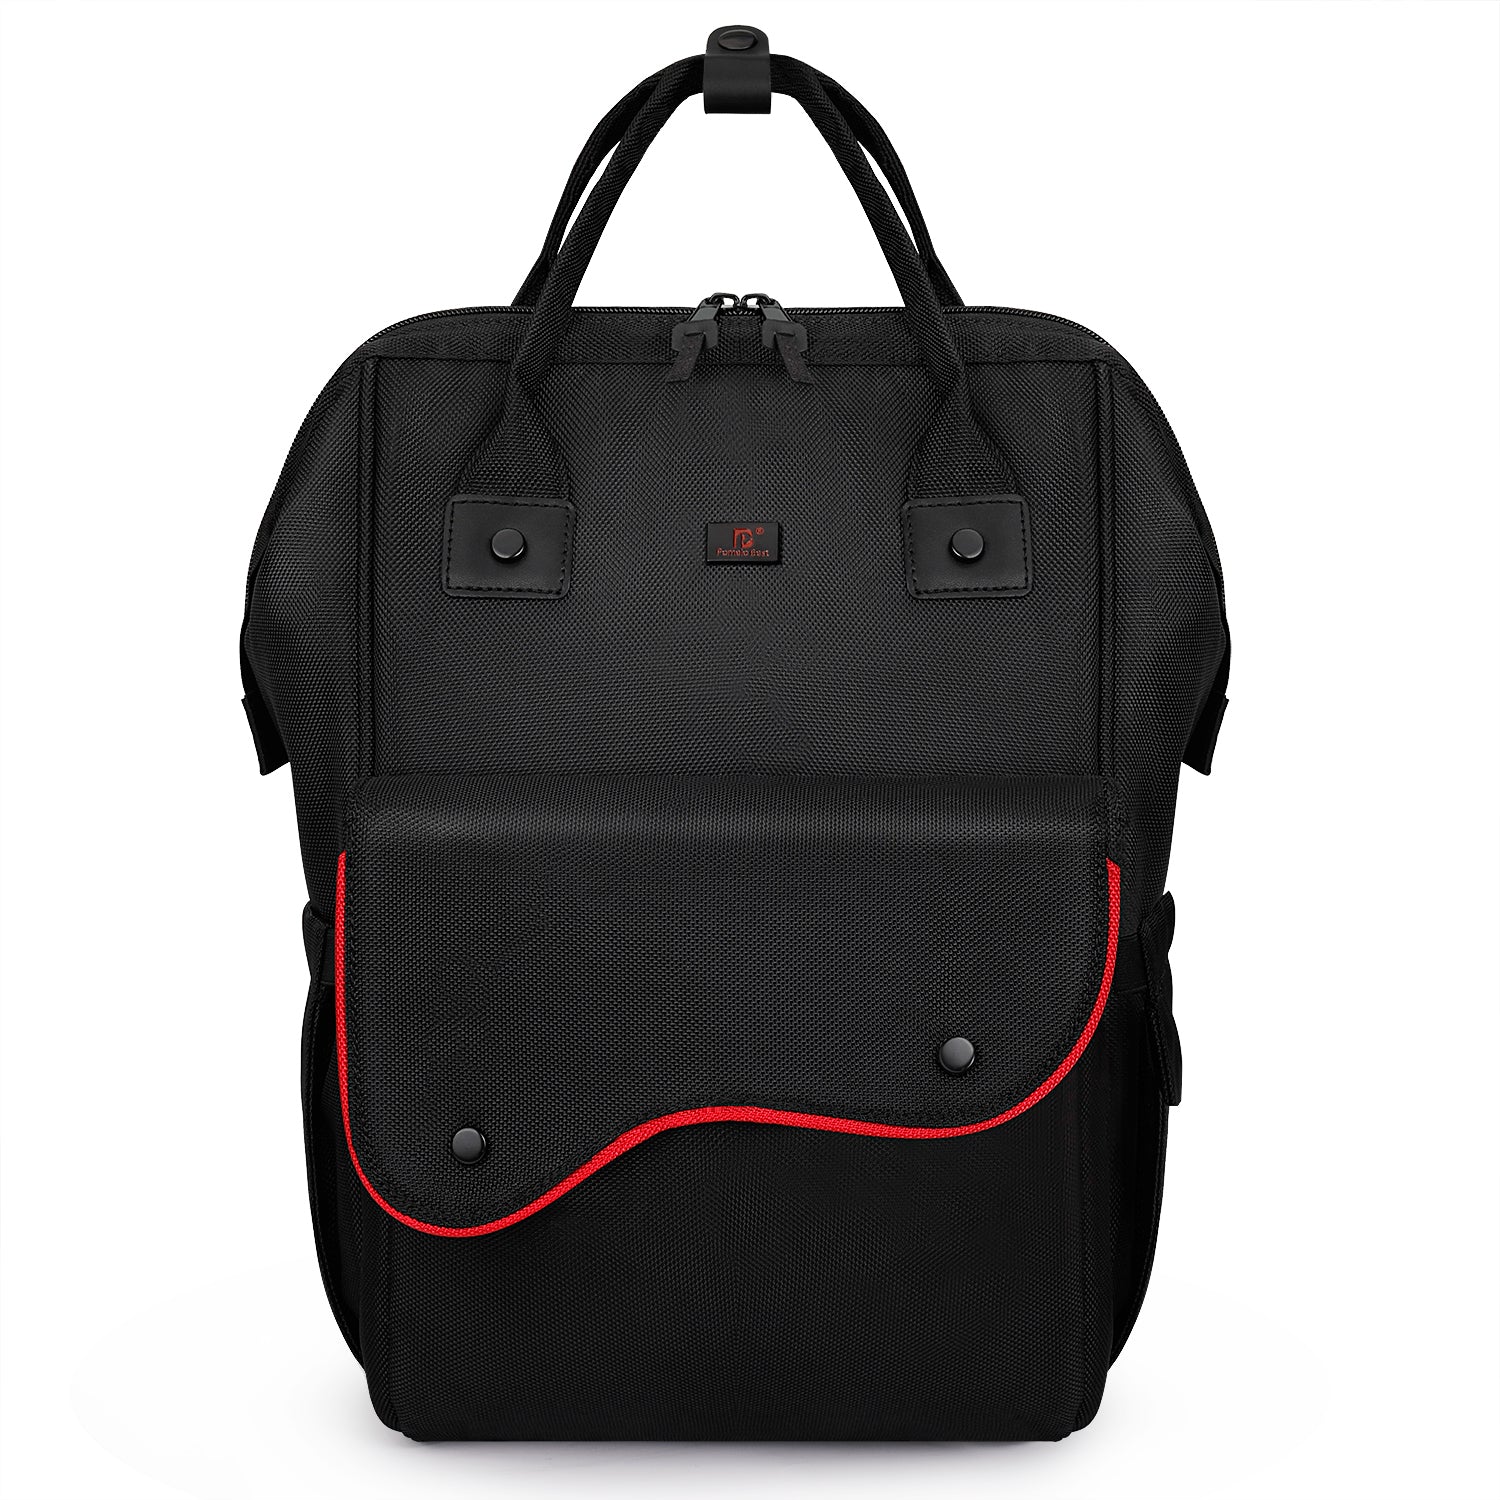 Laptop Backpack with Protective Padding Compartment